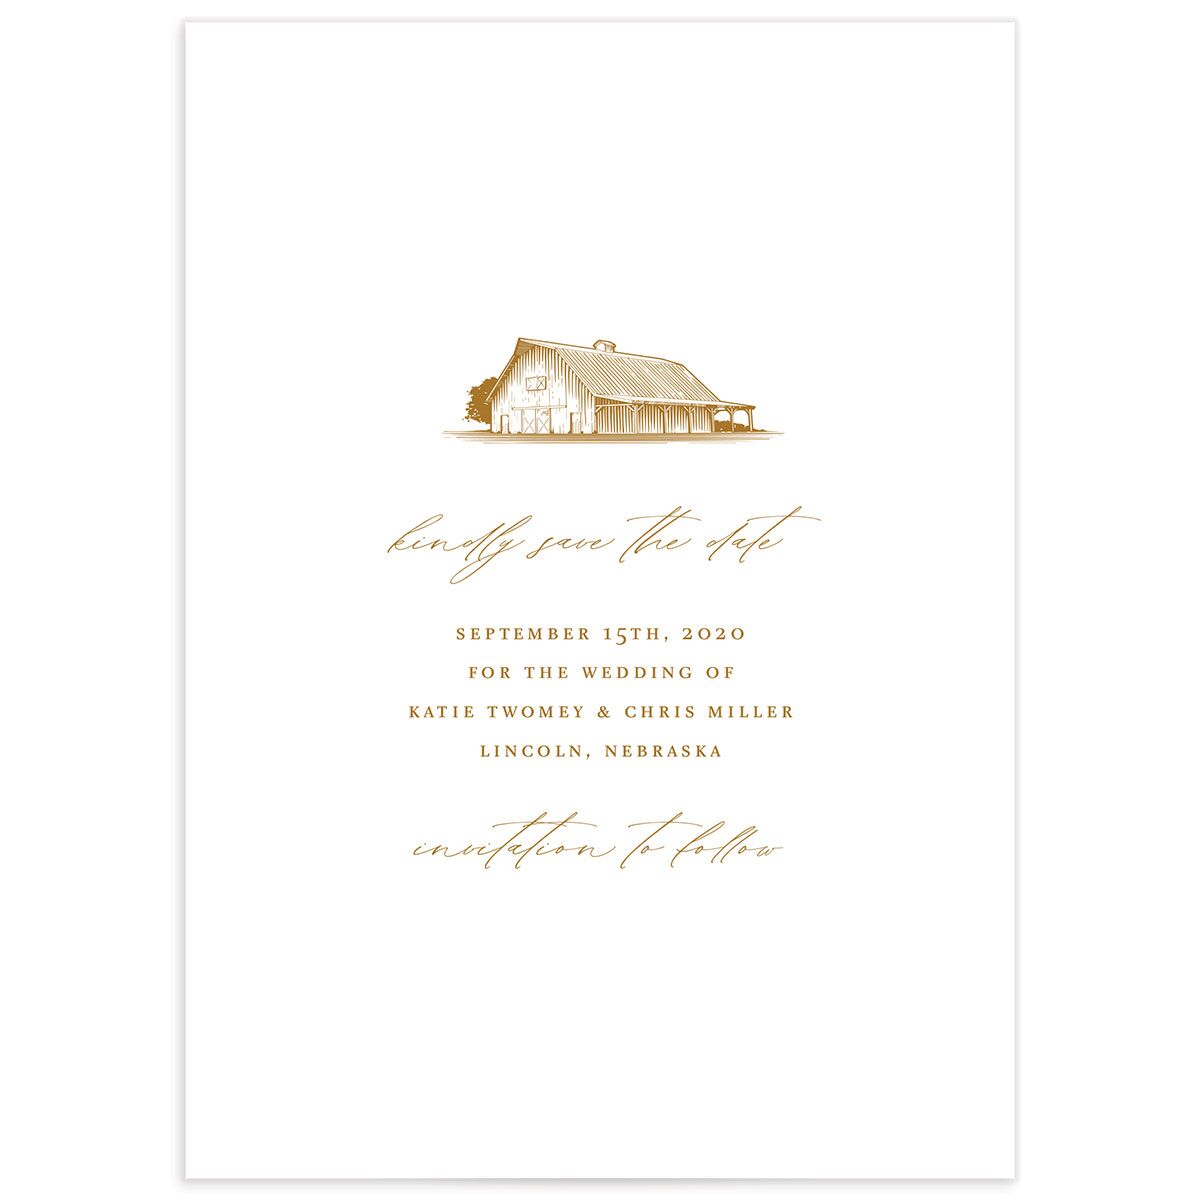 Traditional Landscape Save the Date Cards